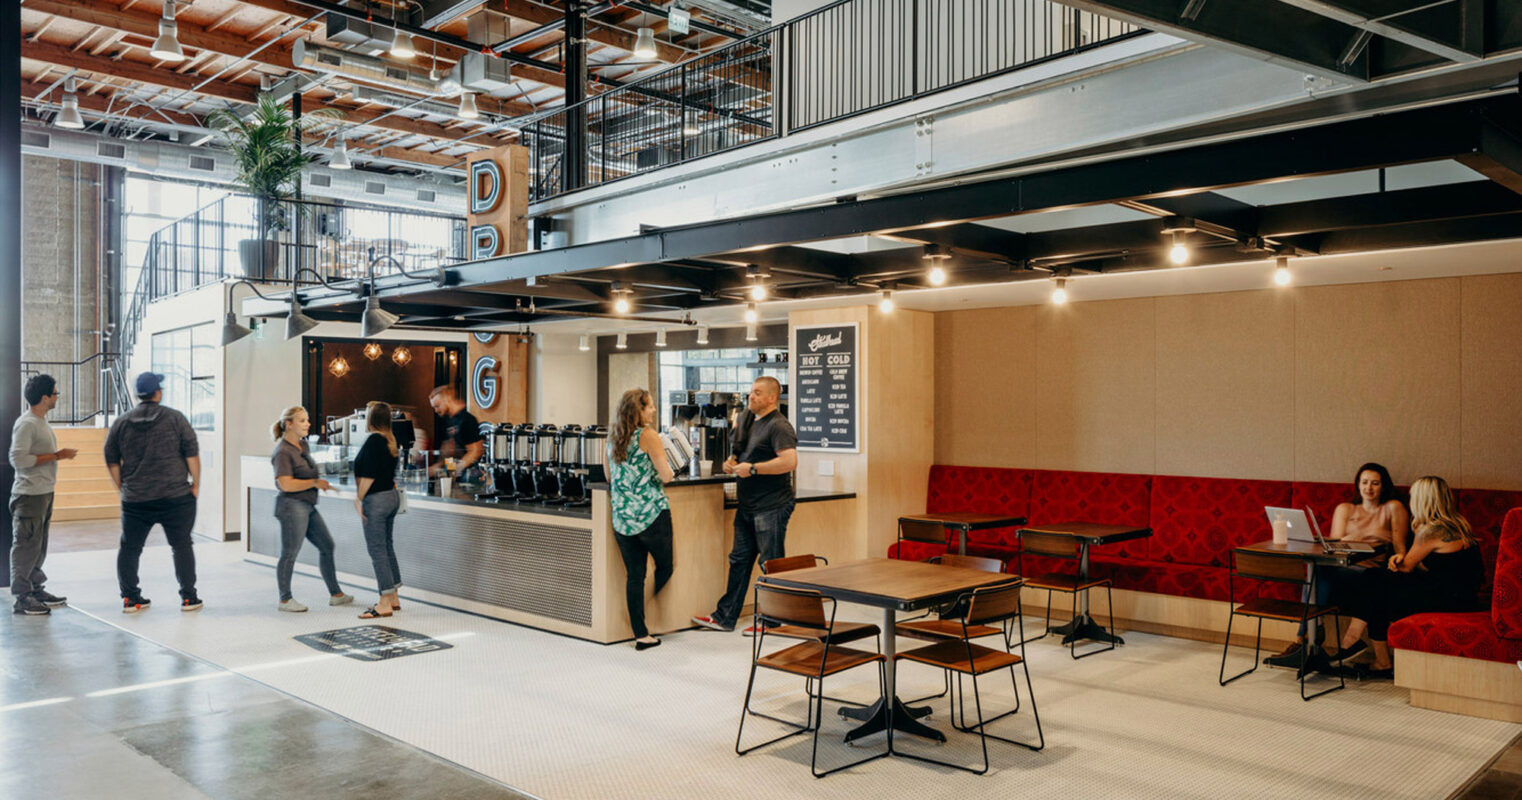 Modern industrial-style coffee shop featuring exposed ceiling pipes, mixed-use concrete, and wood flooring. Suspended linear lighting accentuates the bar area, while booth seating with red upholstered benches offers intimate gathering spaces. A mezzanine level overlooks the bustling space below.